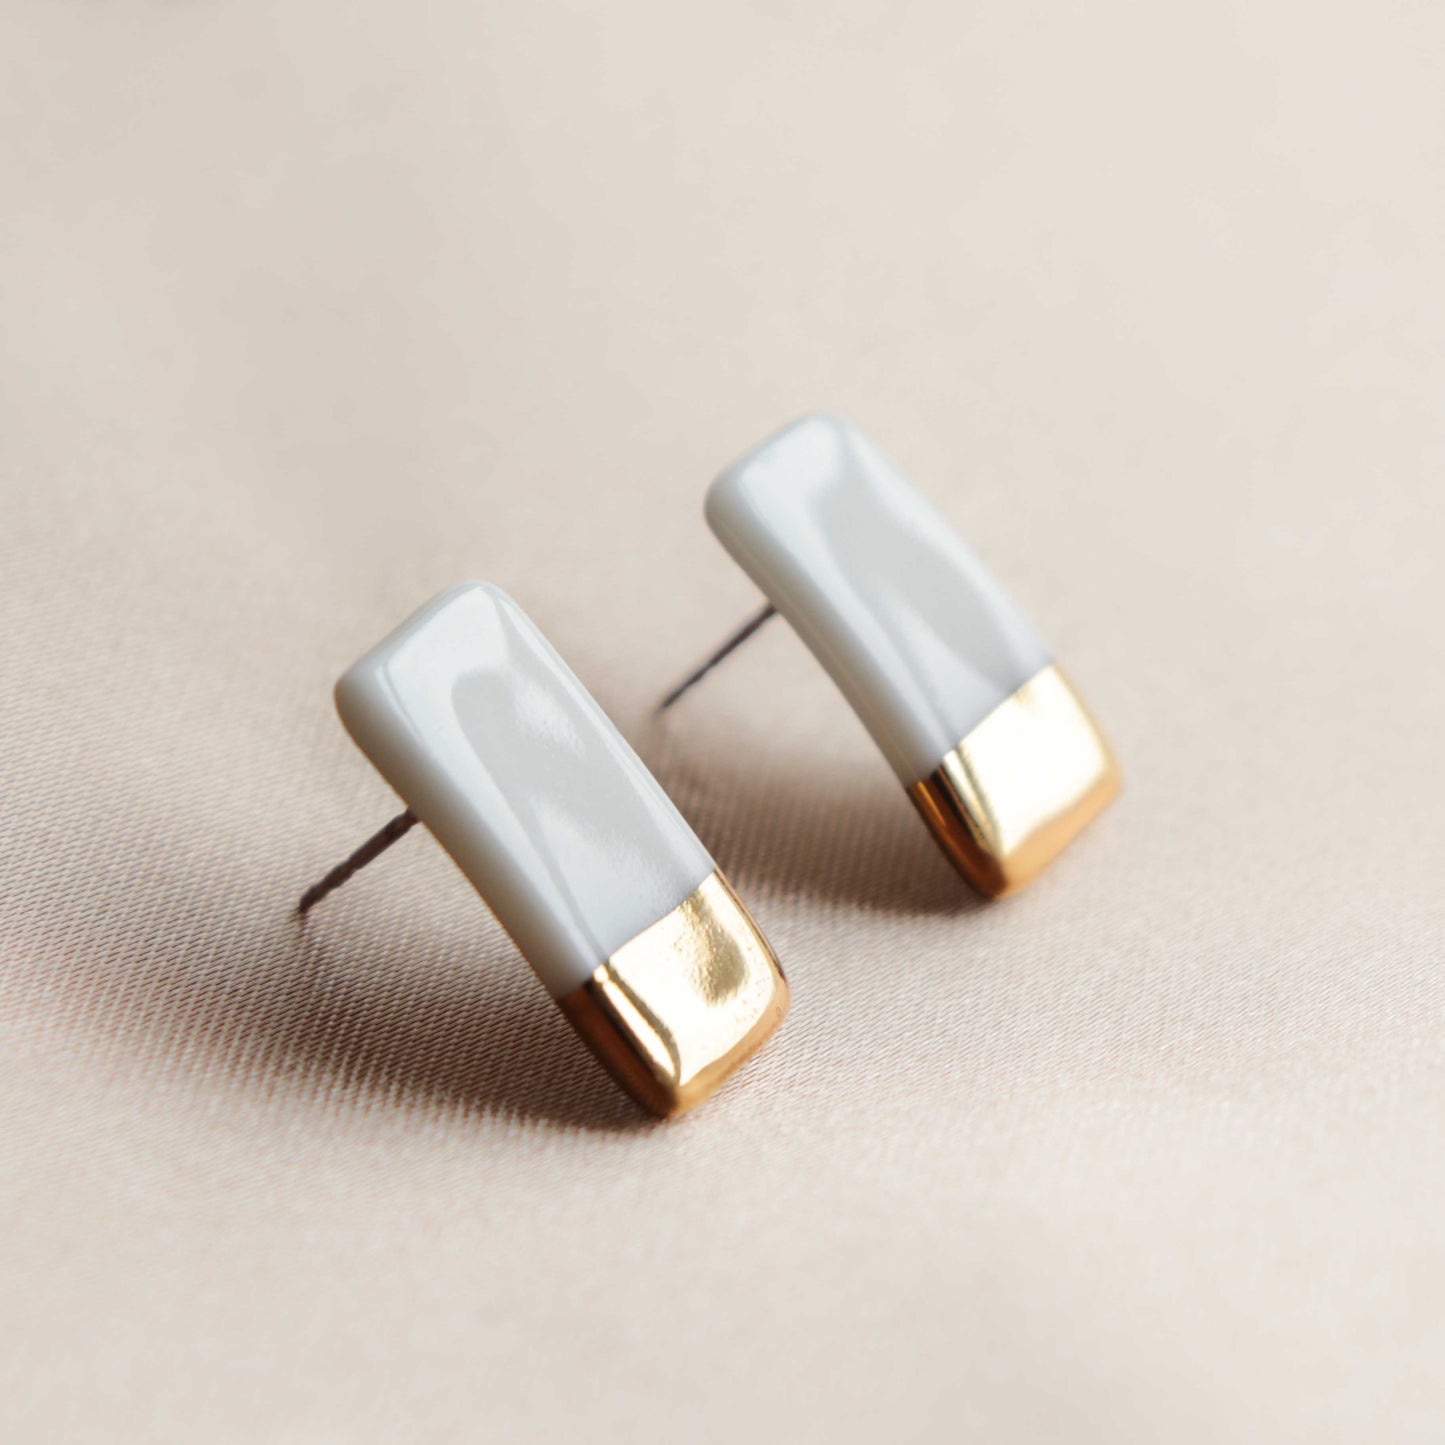 Edgy Studs in White / S